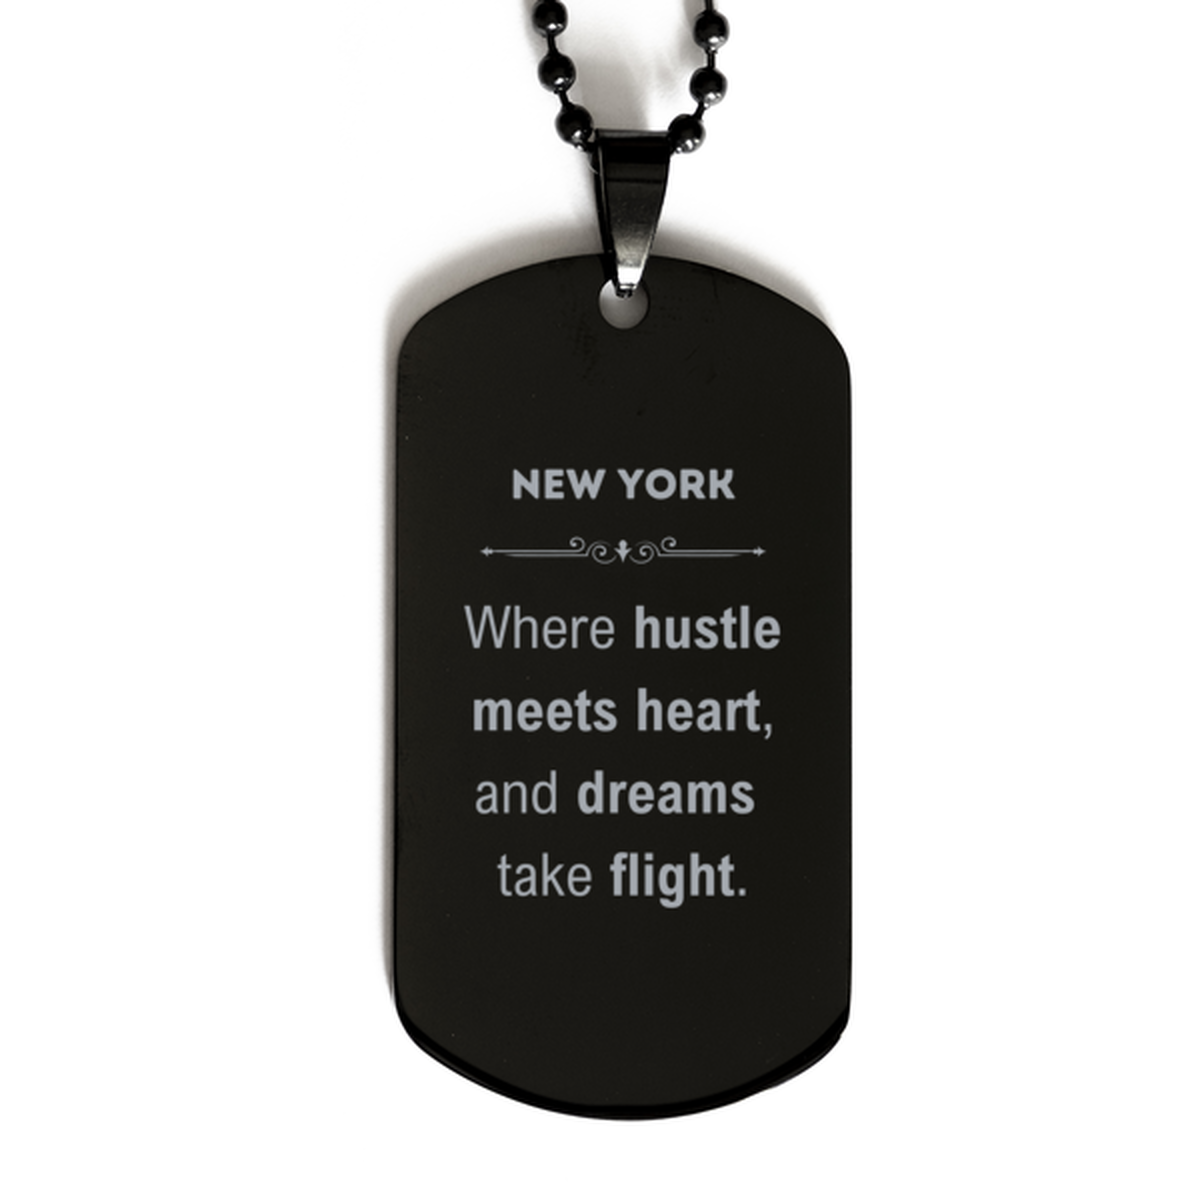 New York: Where hustle meets heart, and dreams take flight, New York Gifts, Proud New York Christmas Birthday New York Black Dog Tag, New York State People, Men, Women, Friends